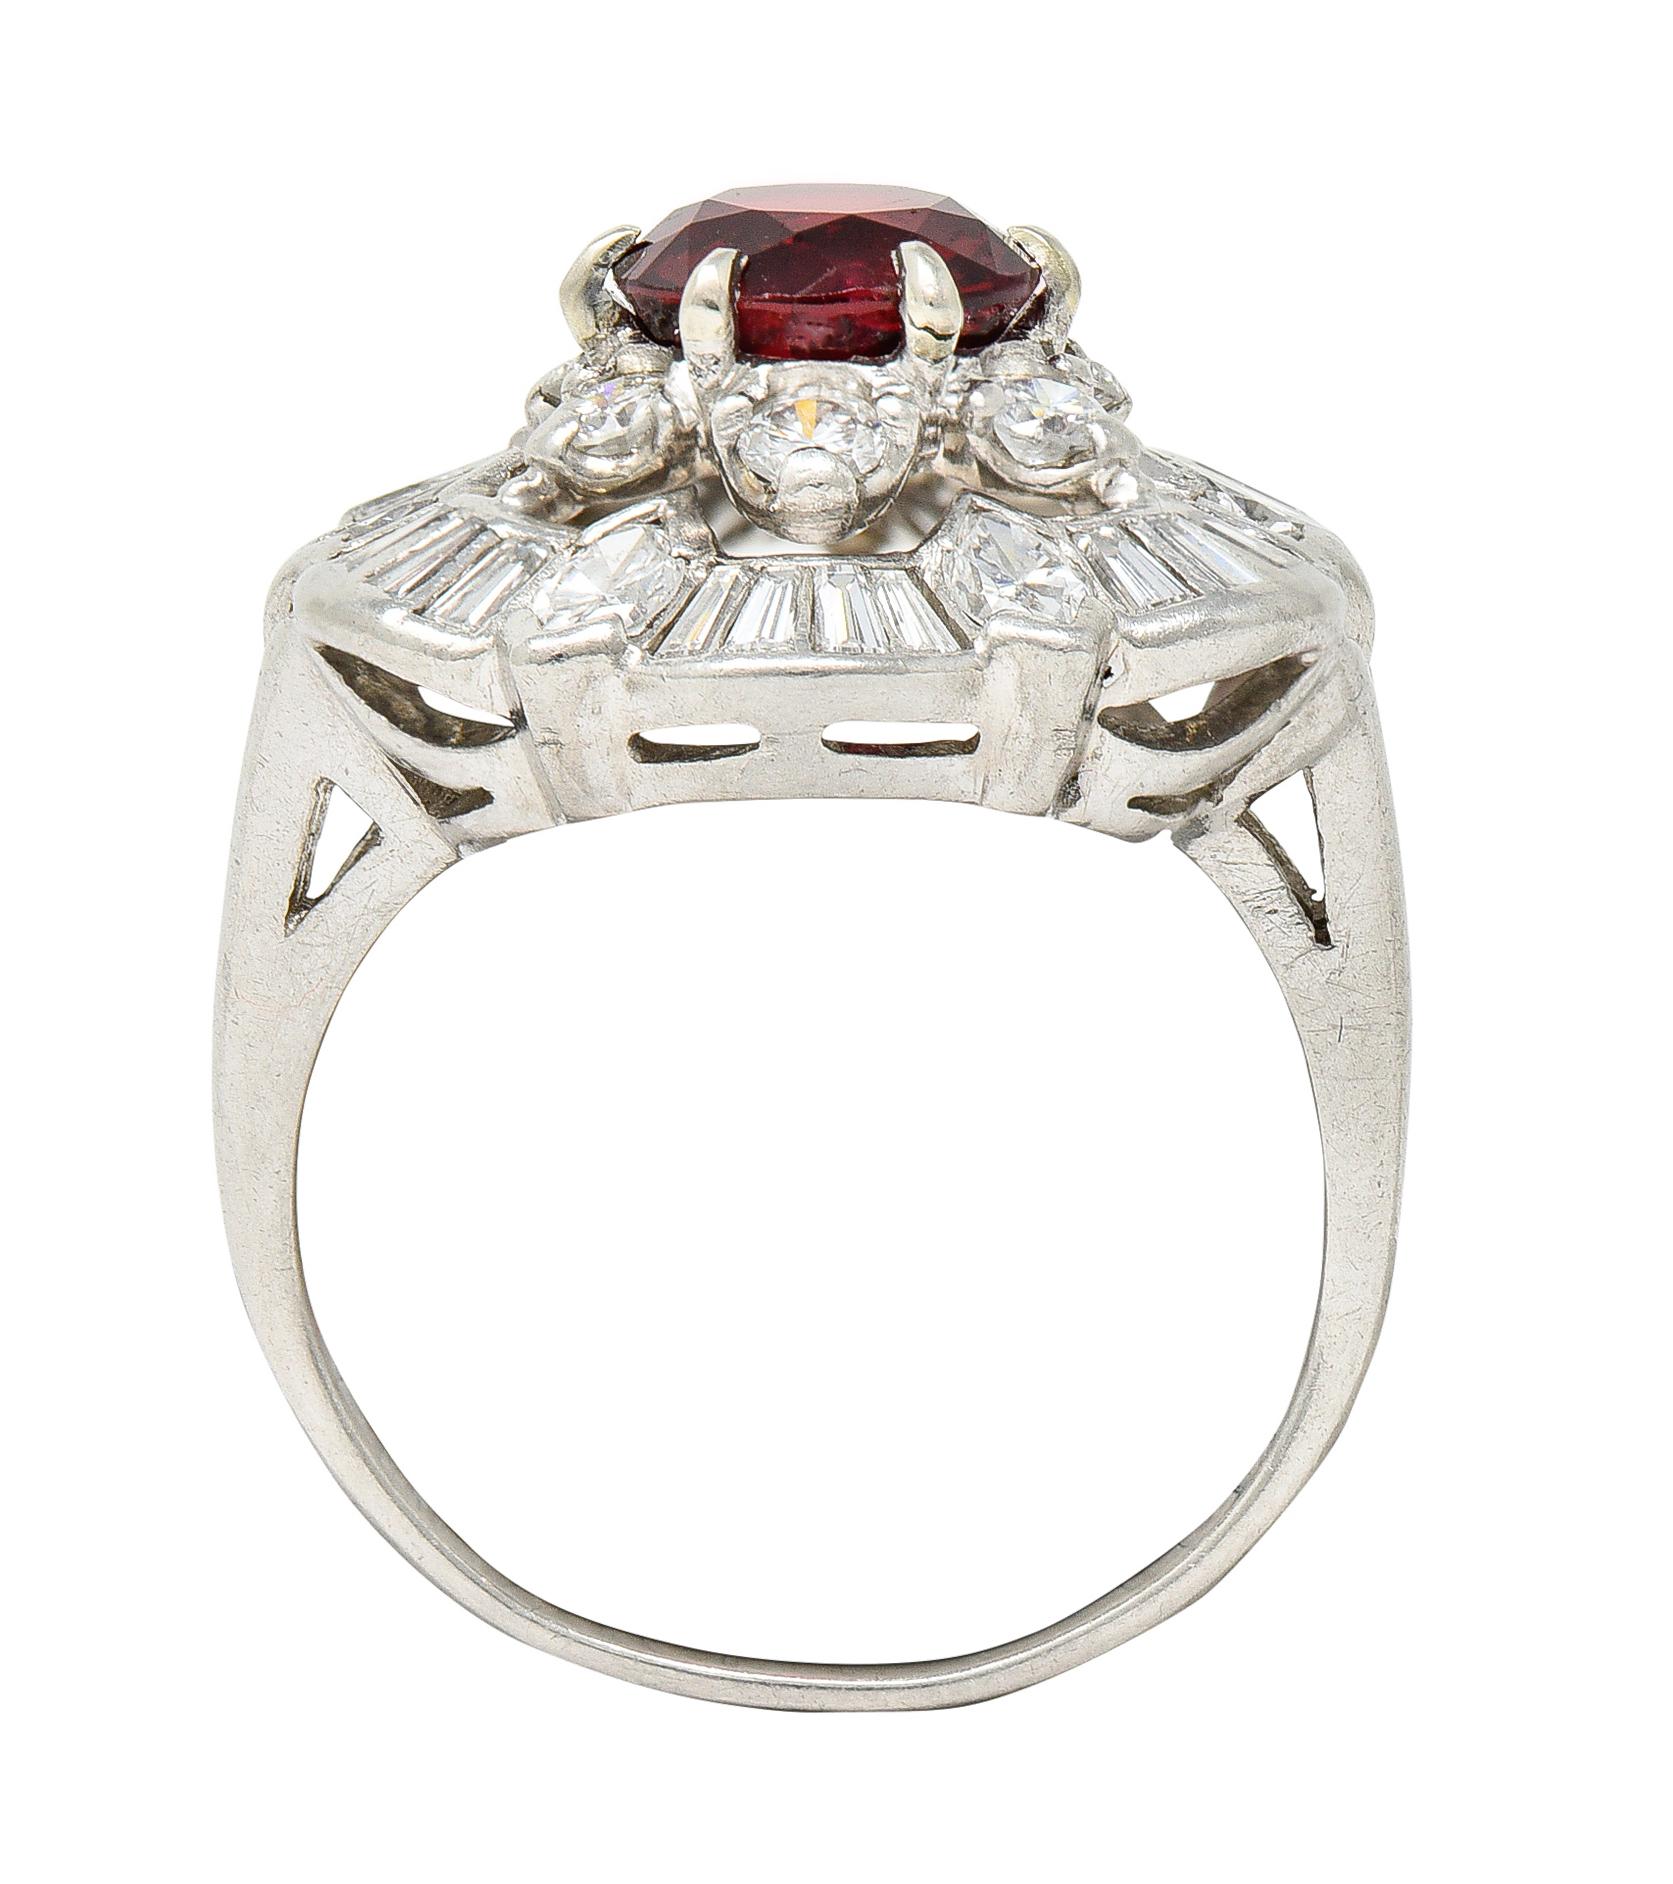 1950's Mid-Century 2.77 Carats Red Spinel Diamond Platinum Cluster Cocktail Ring For Sale 6